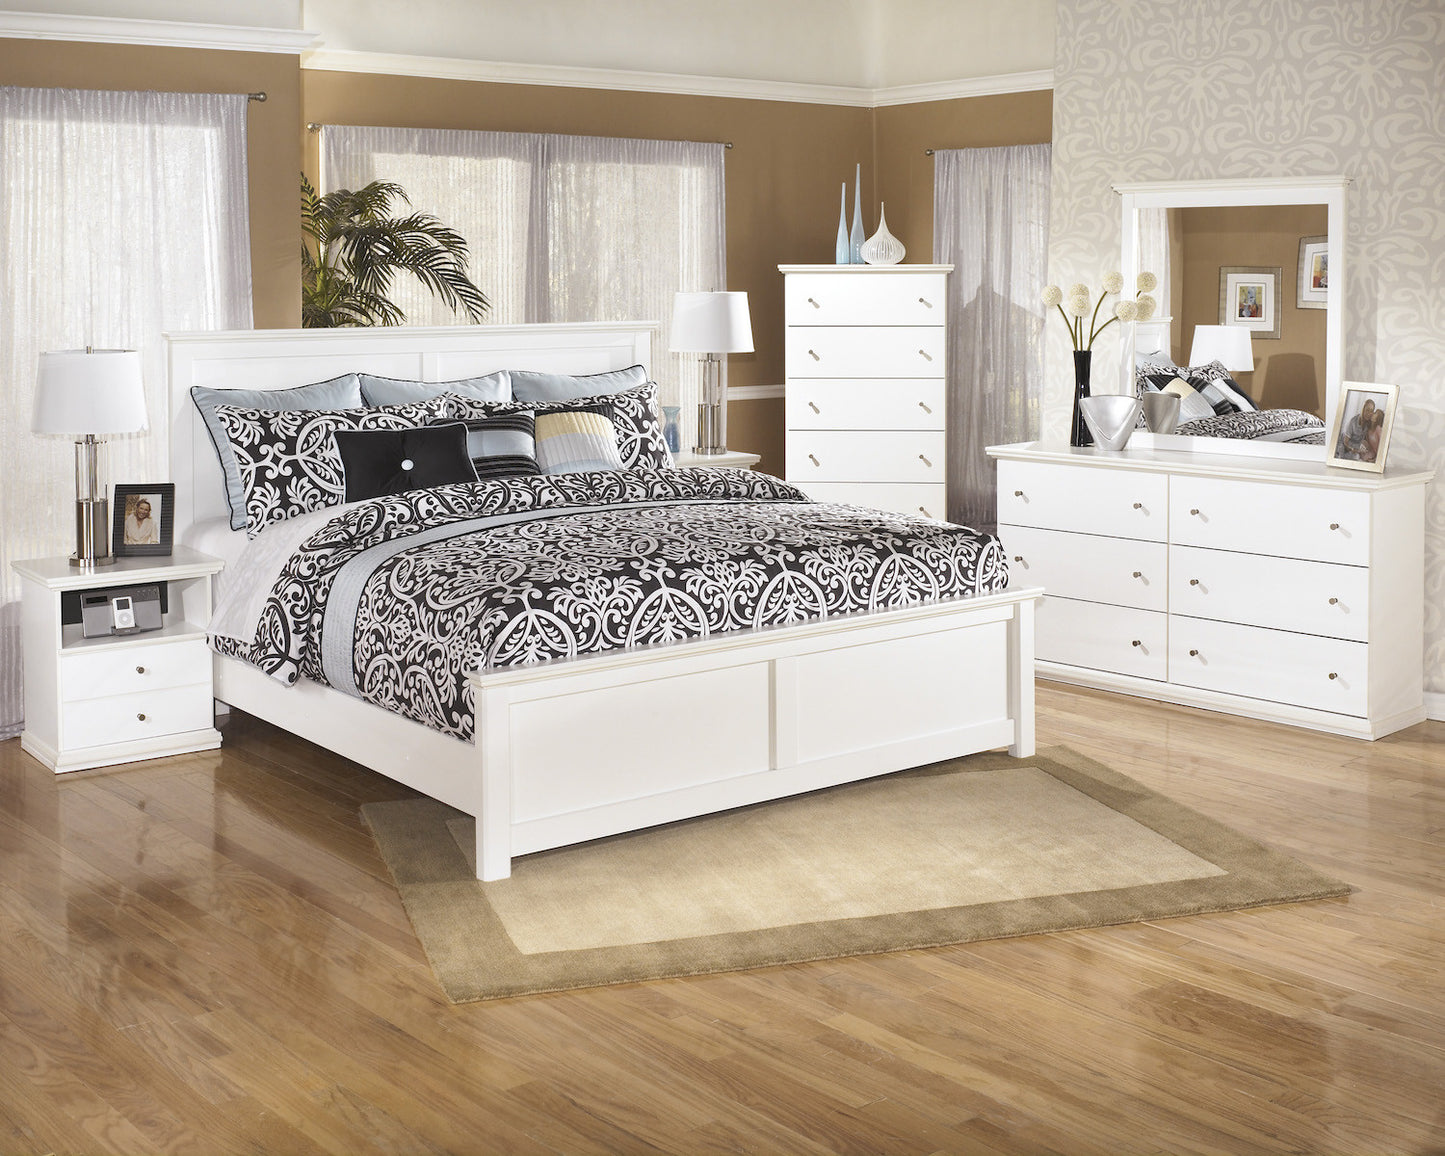 Ashley Bostwick Shoals 5 PC E King Panel Headboard Bedroom Set with two Nightstands in White